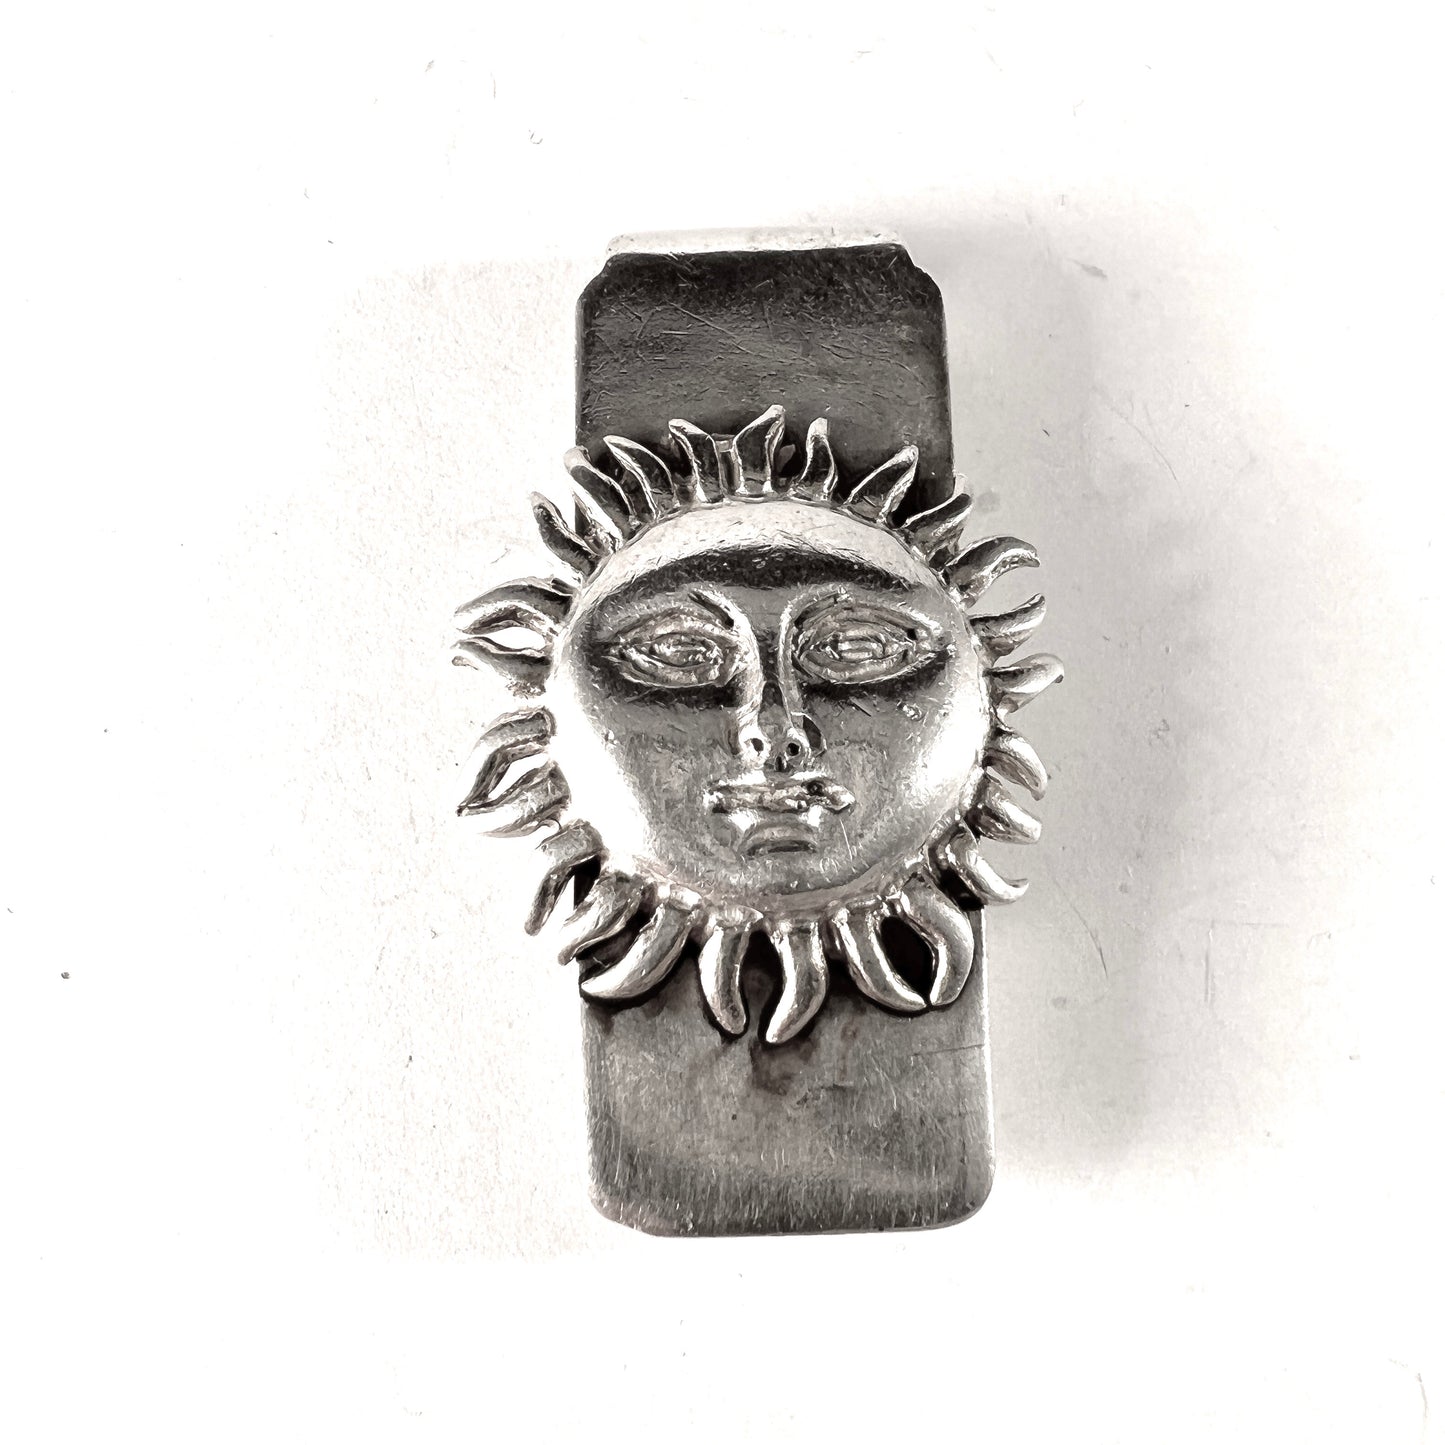 Sergio Bustamante, Mexico. Vintage Sterling Silver Money Clip (or Neck-ring Pendant?) Signed